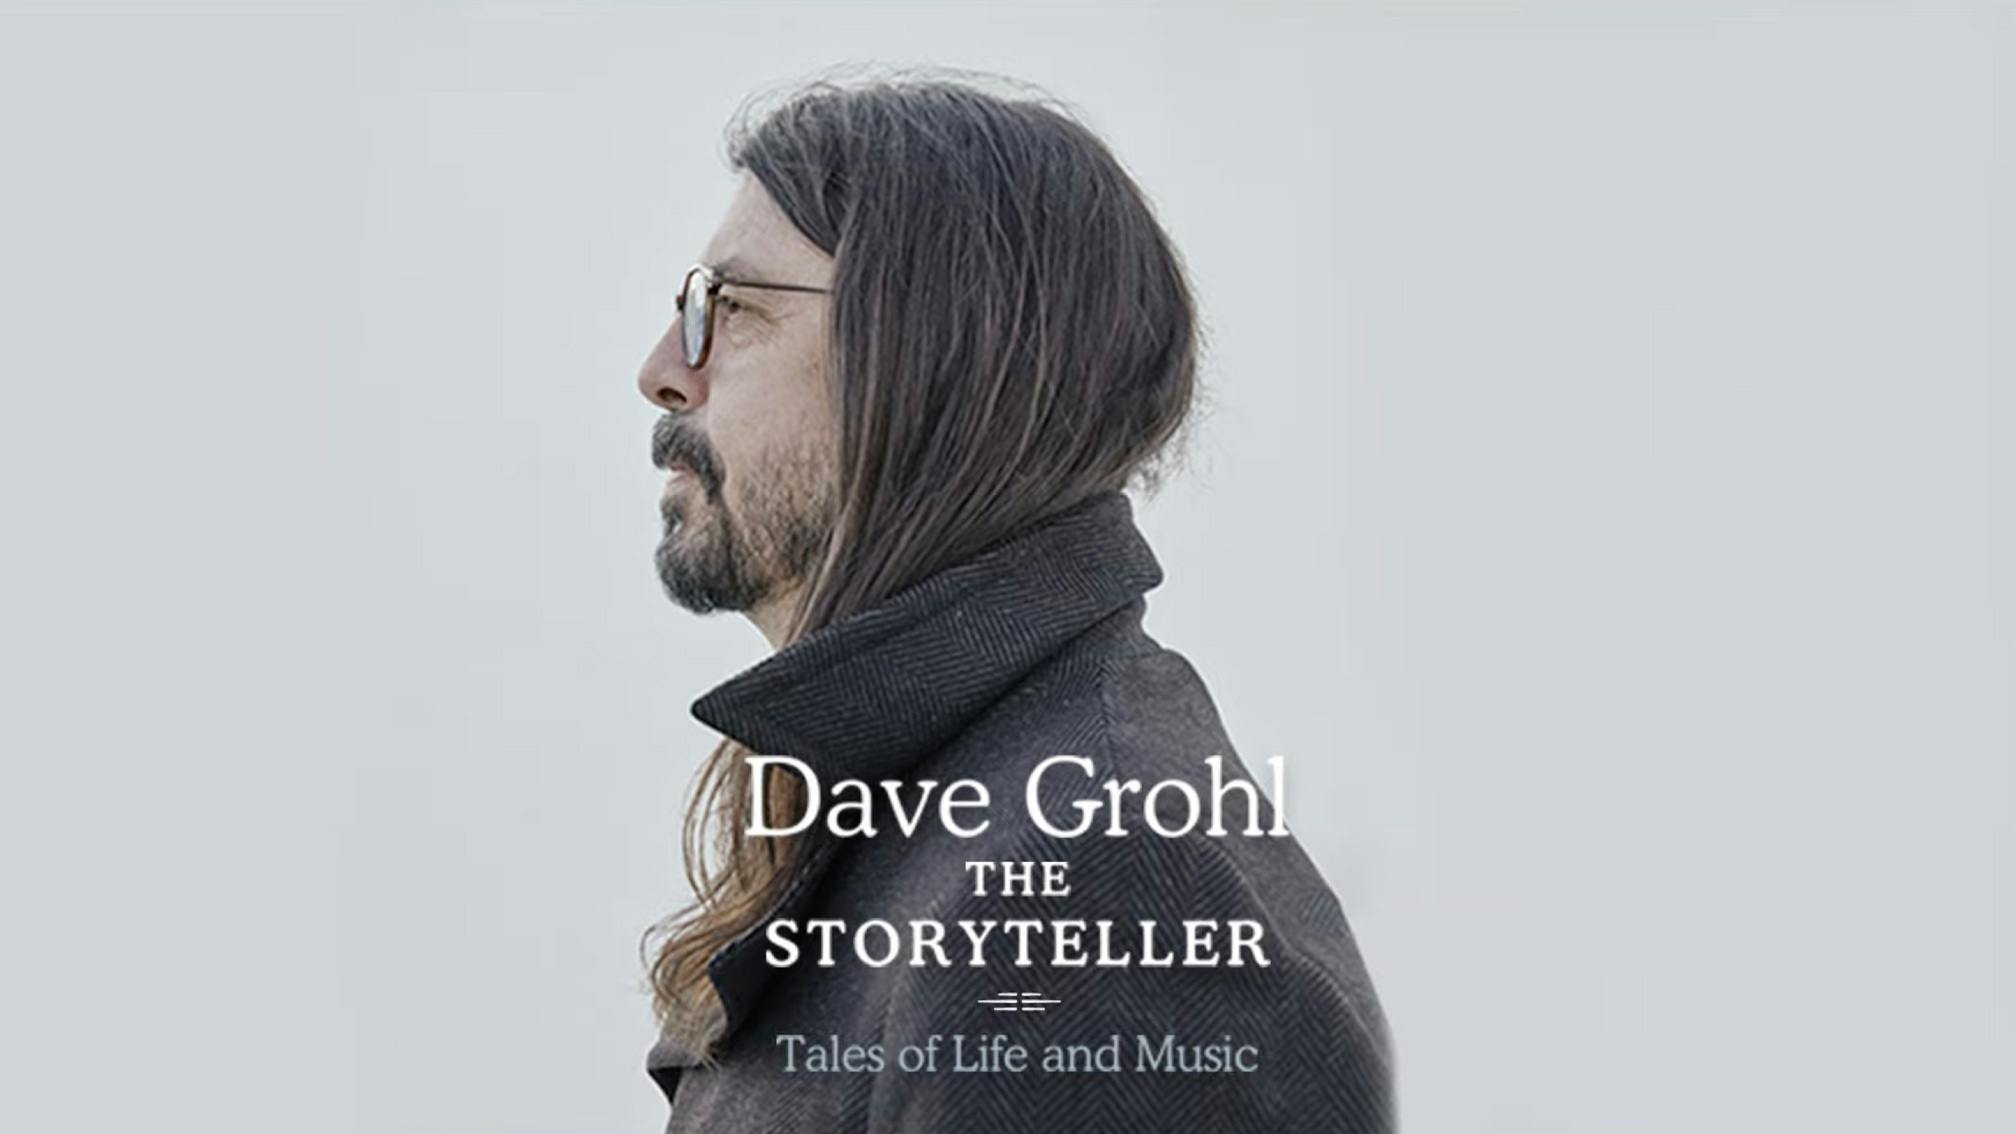 Dave Grohl announces new book, The Storyteller: "A collection of memories of a life lived loud"